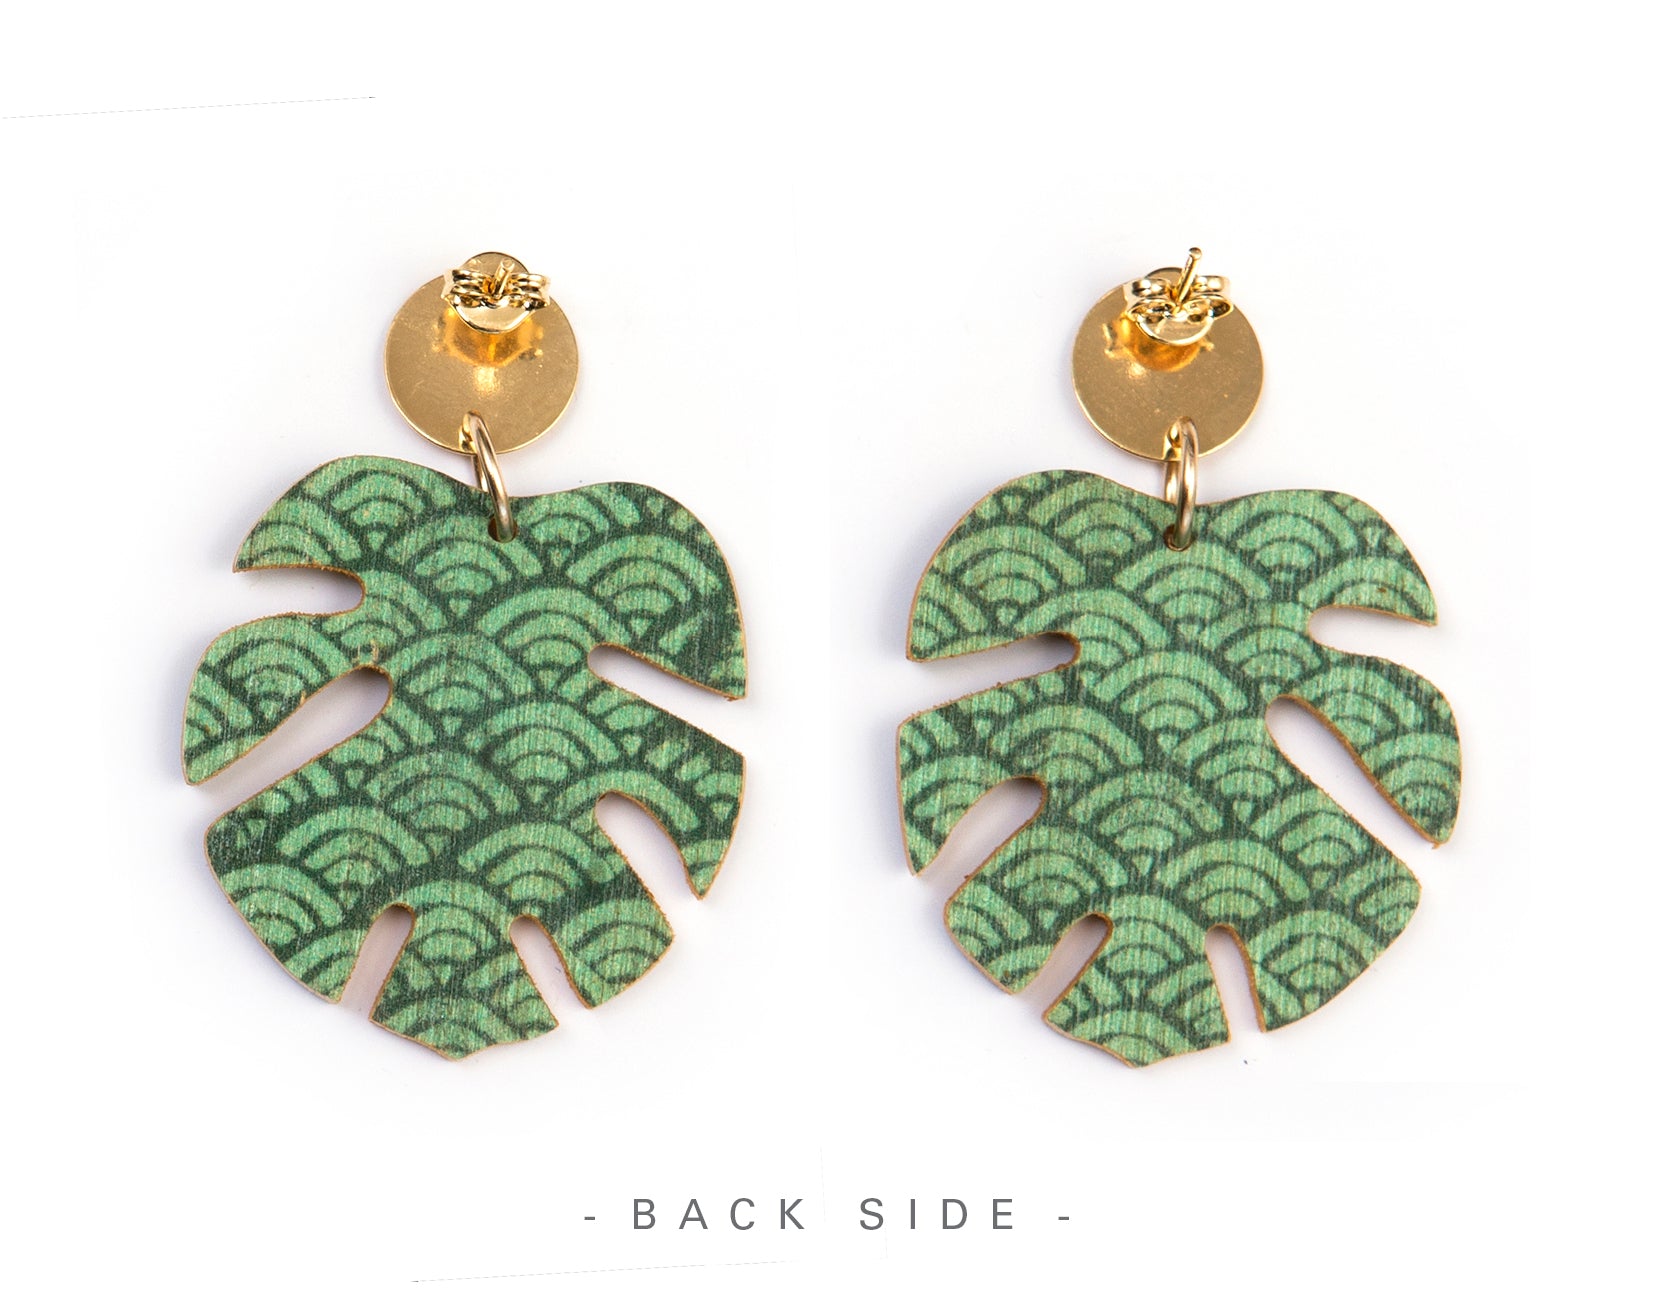 Buy Online Premium Quality Plant Earrings For Plant Lover - Plant Lady Gift - Monstera Deliciosa Earrings, Urban Jungle Life